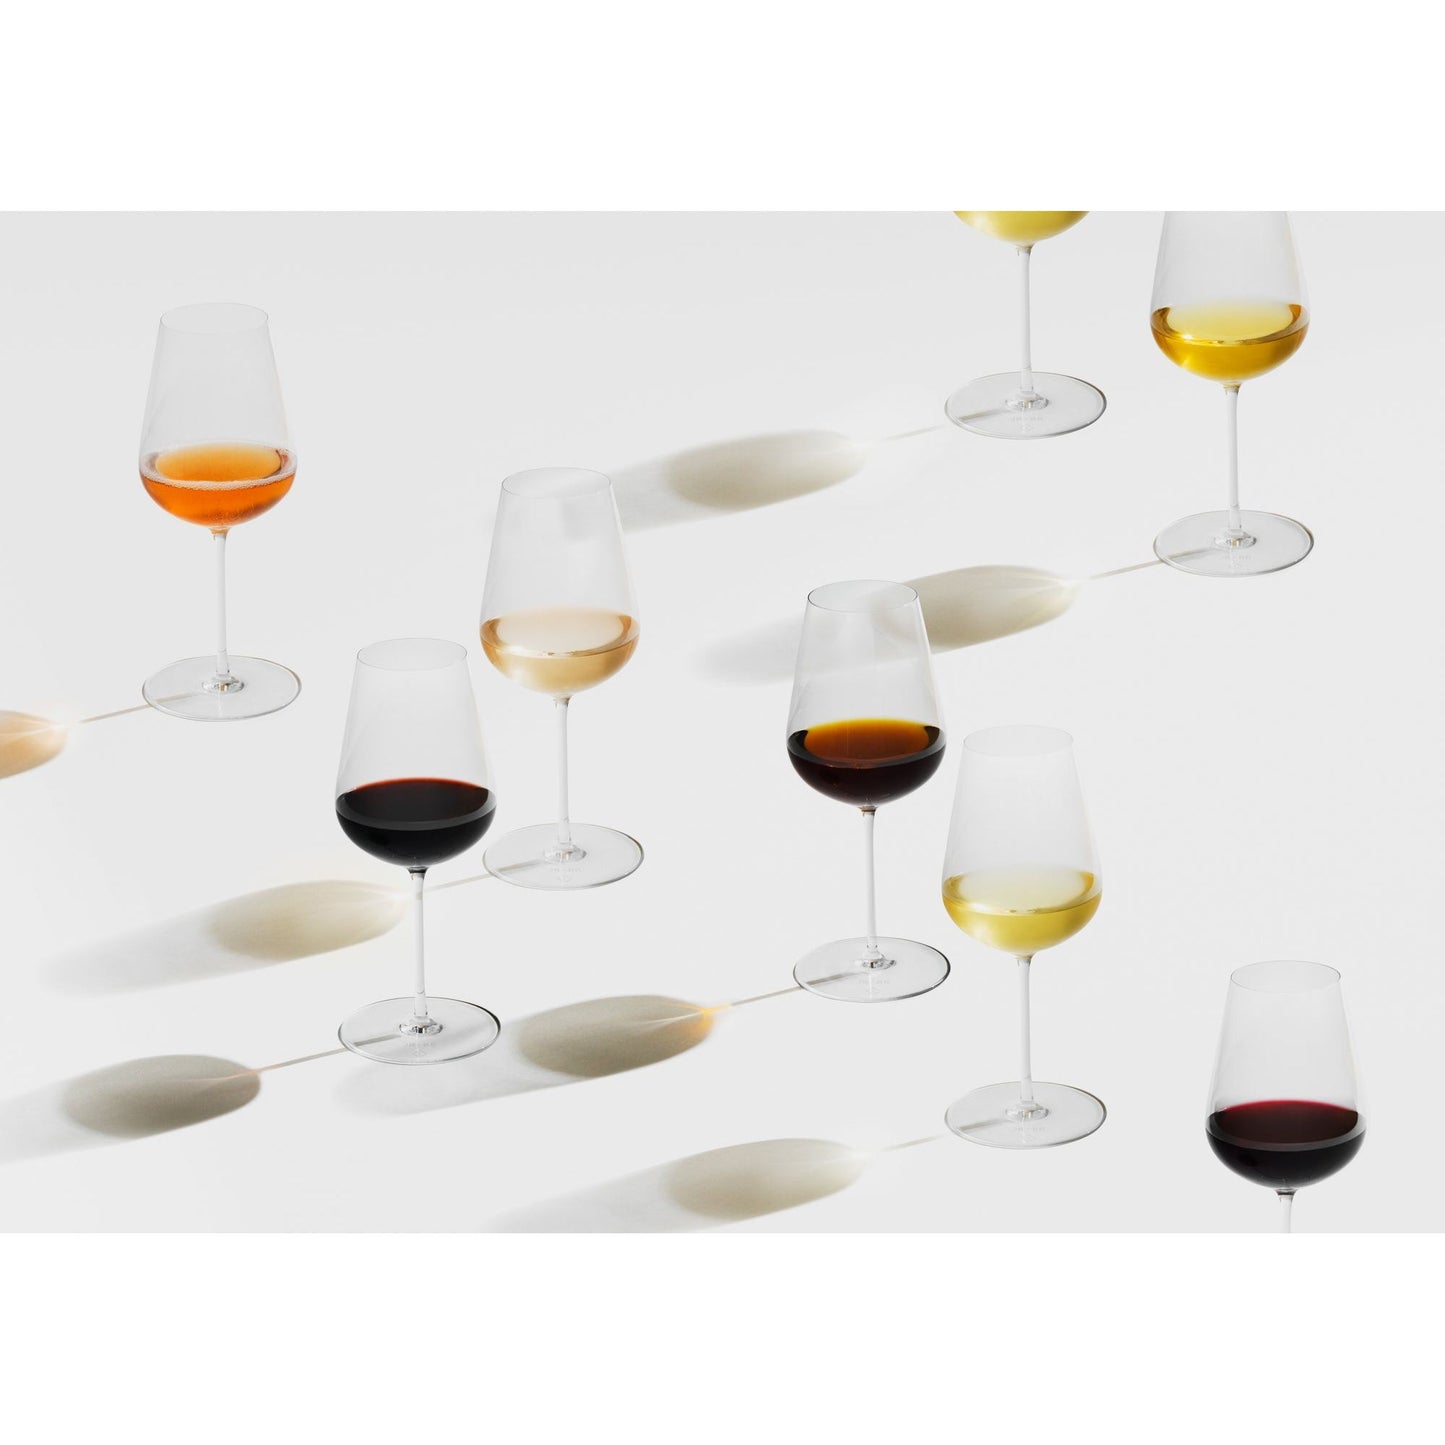 Richard Brendon The Jancis Robinson Collection | Wine Glass set of 2